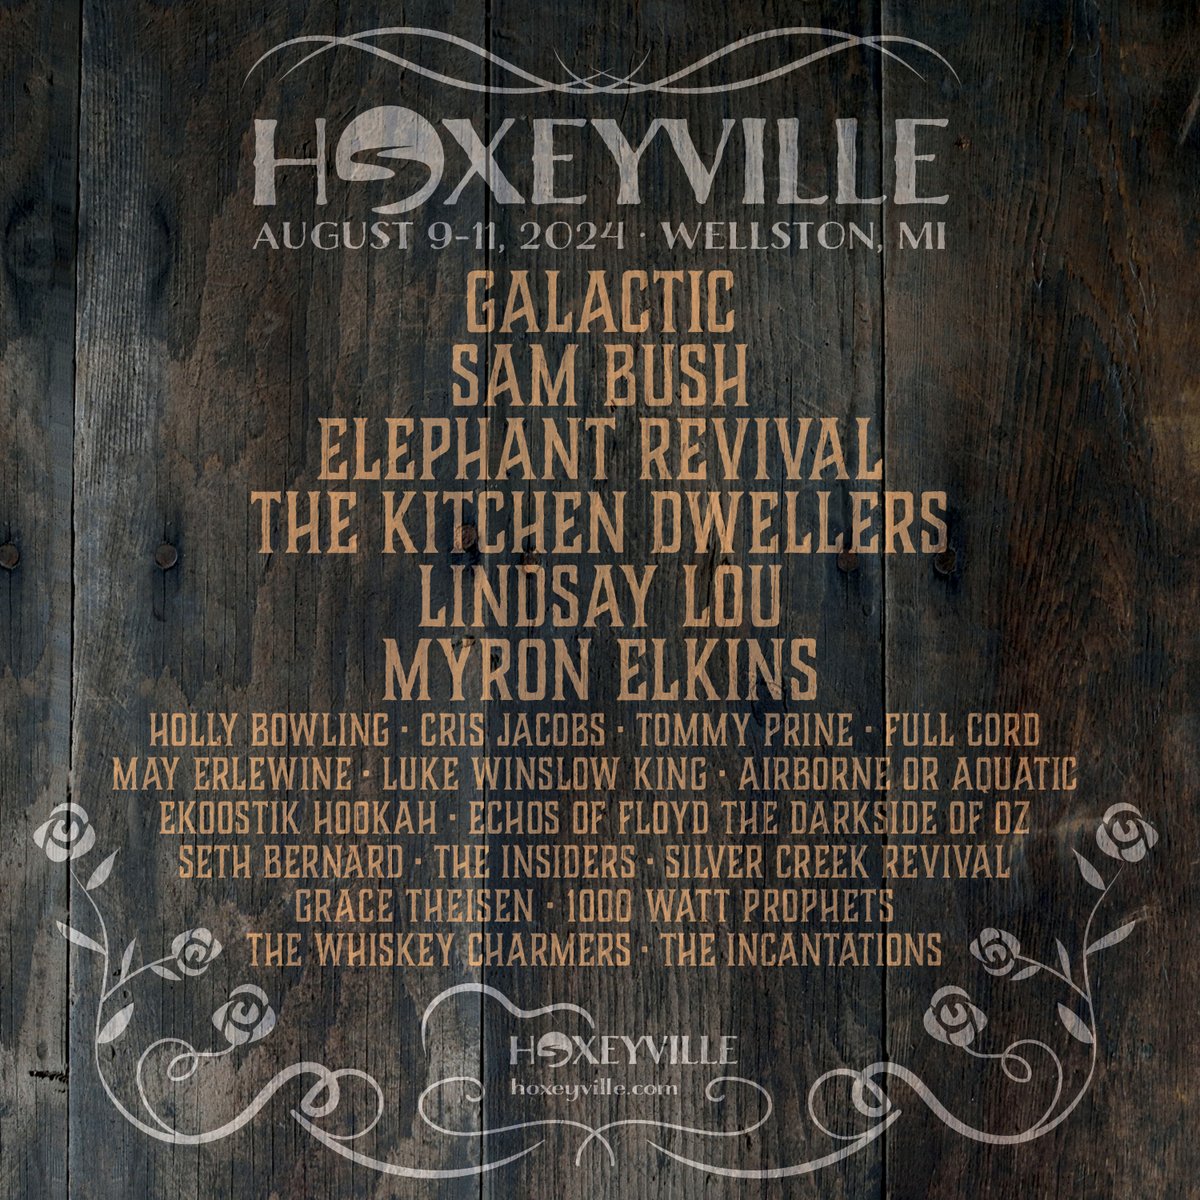 Michigan friends! You can catch me at the Hoxeyville Music Festival, August 9-11 in Wellston, MI!! Full details at hoxeyville.com